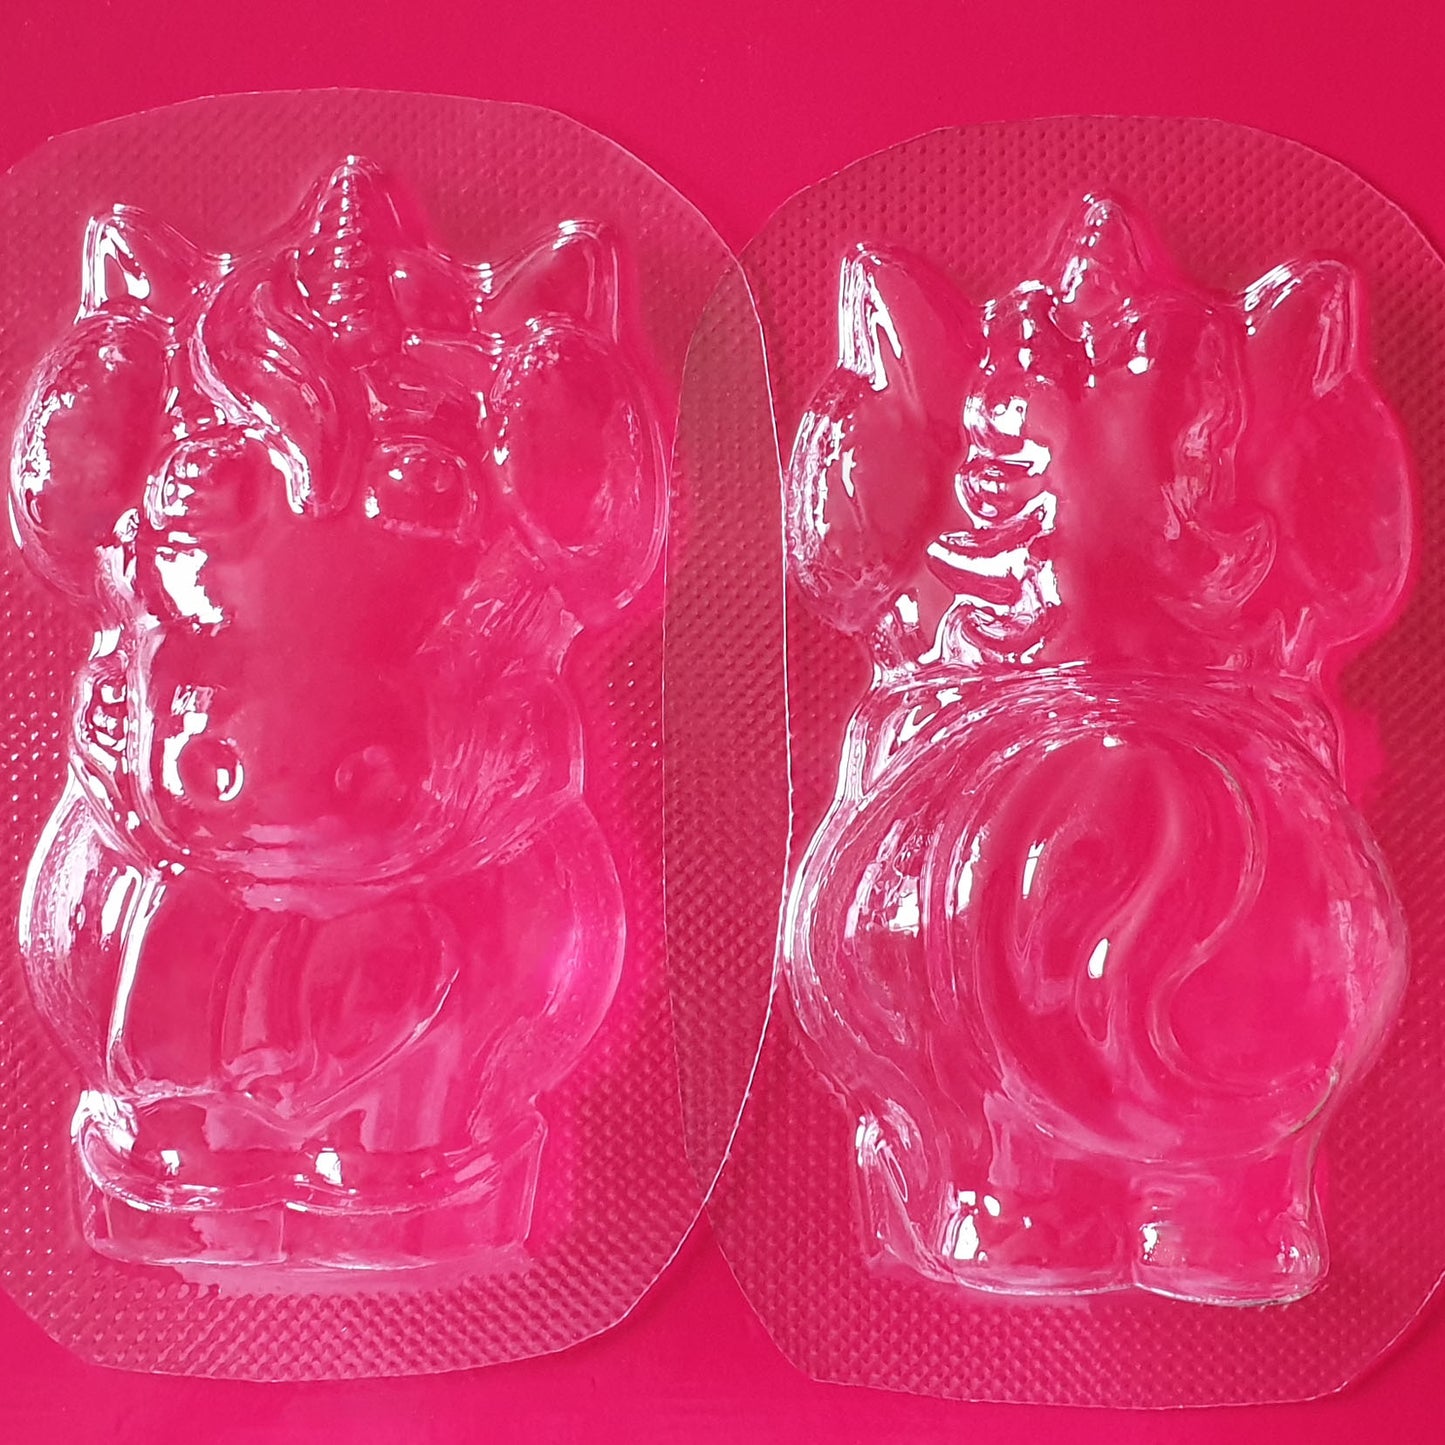 Unicorn Mould | Truly Personal | Bath Bomb, Soap, Resin, Chocolate, Jelly, Wax Melts Mold